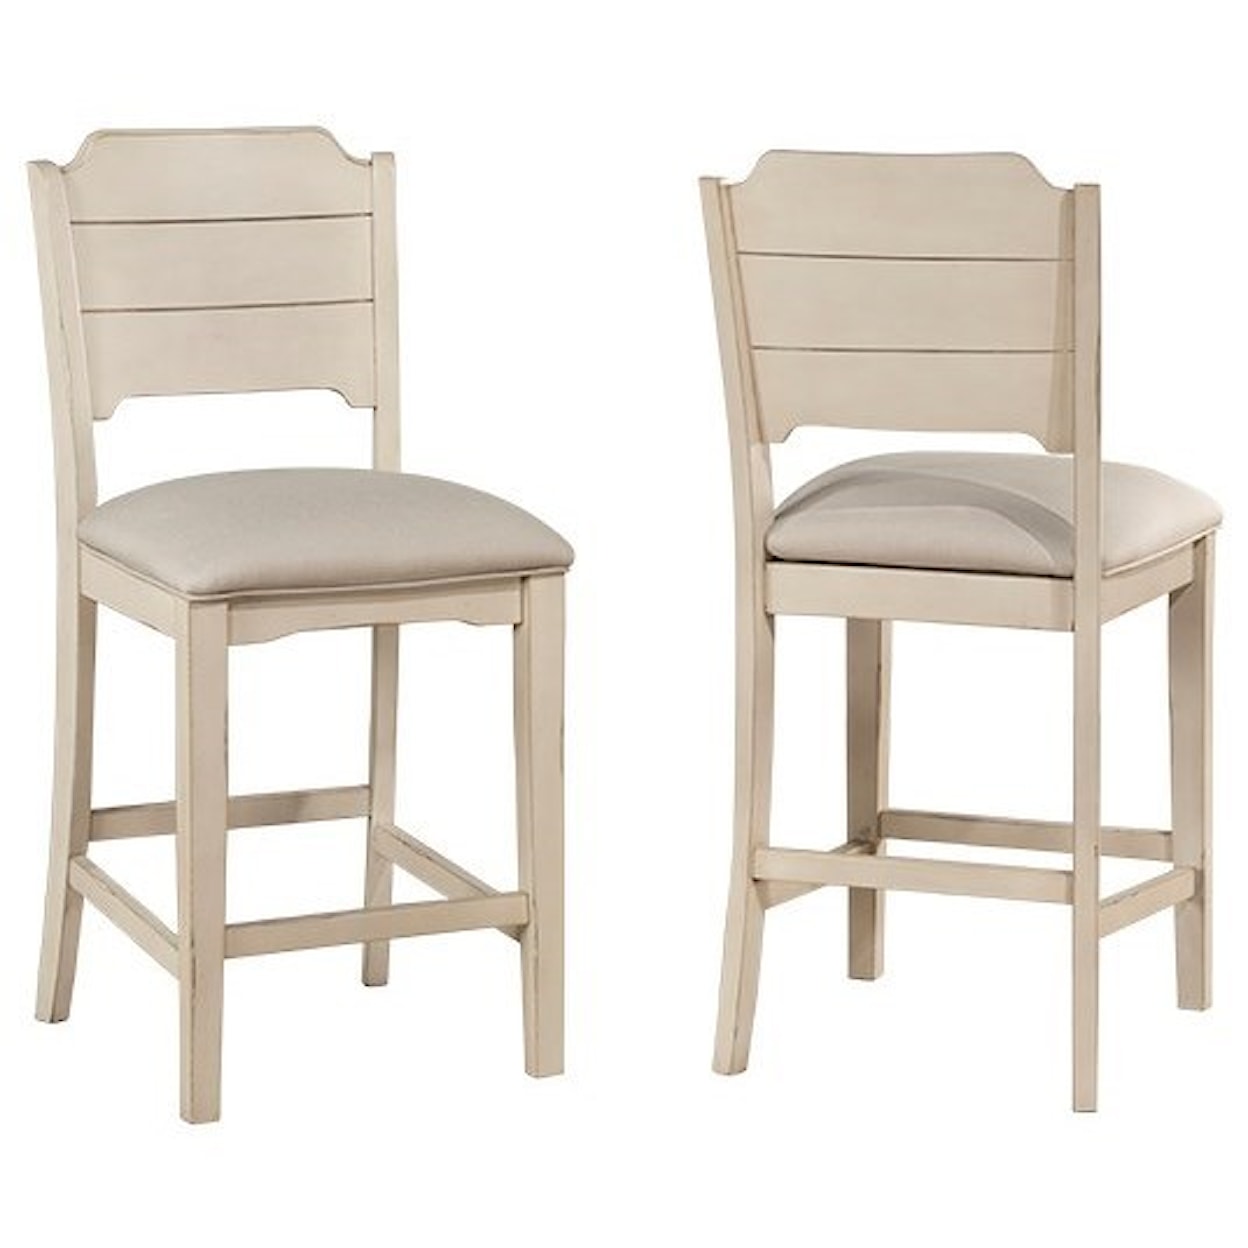 Hillsdale Clarion Non-Swivel Counter Height Stool -Set of 2